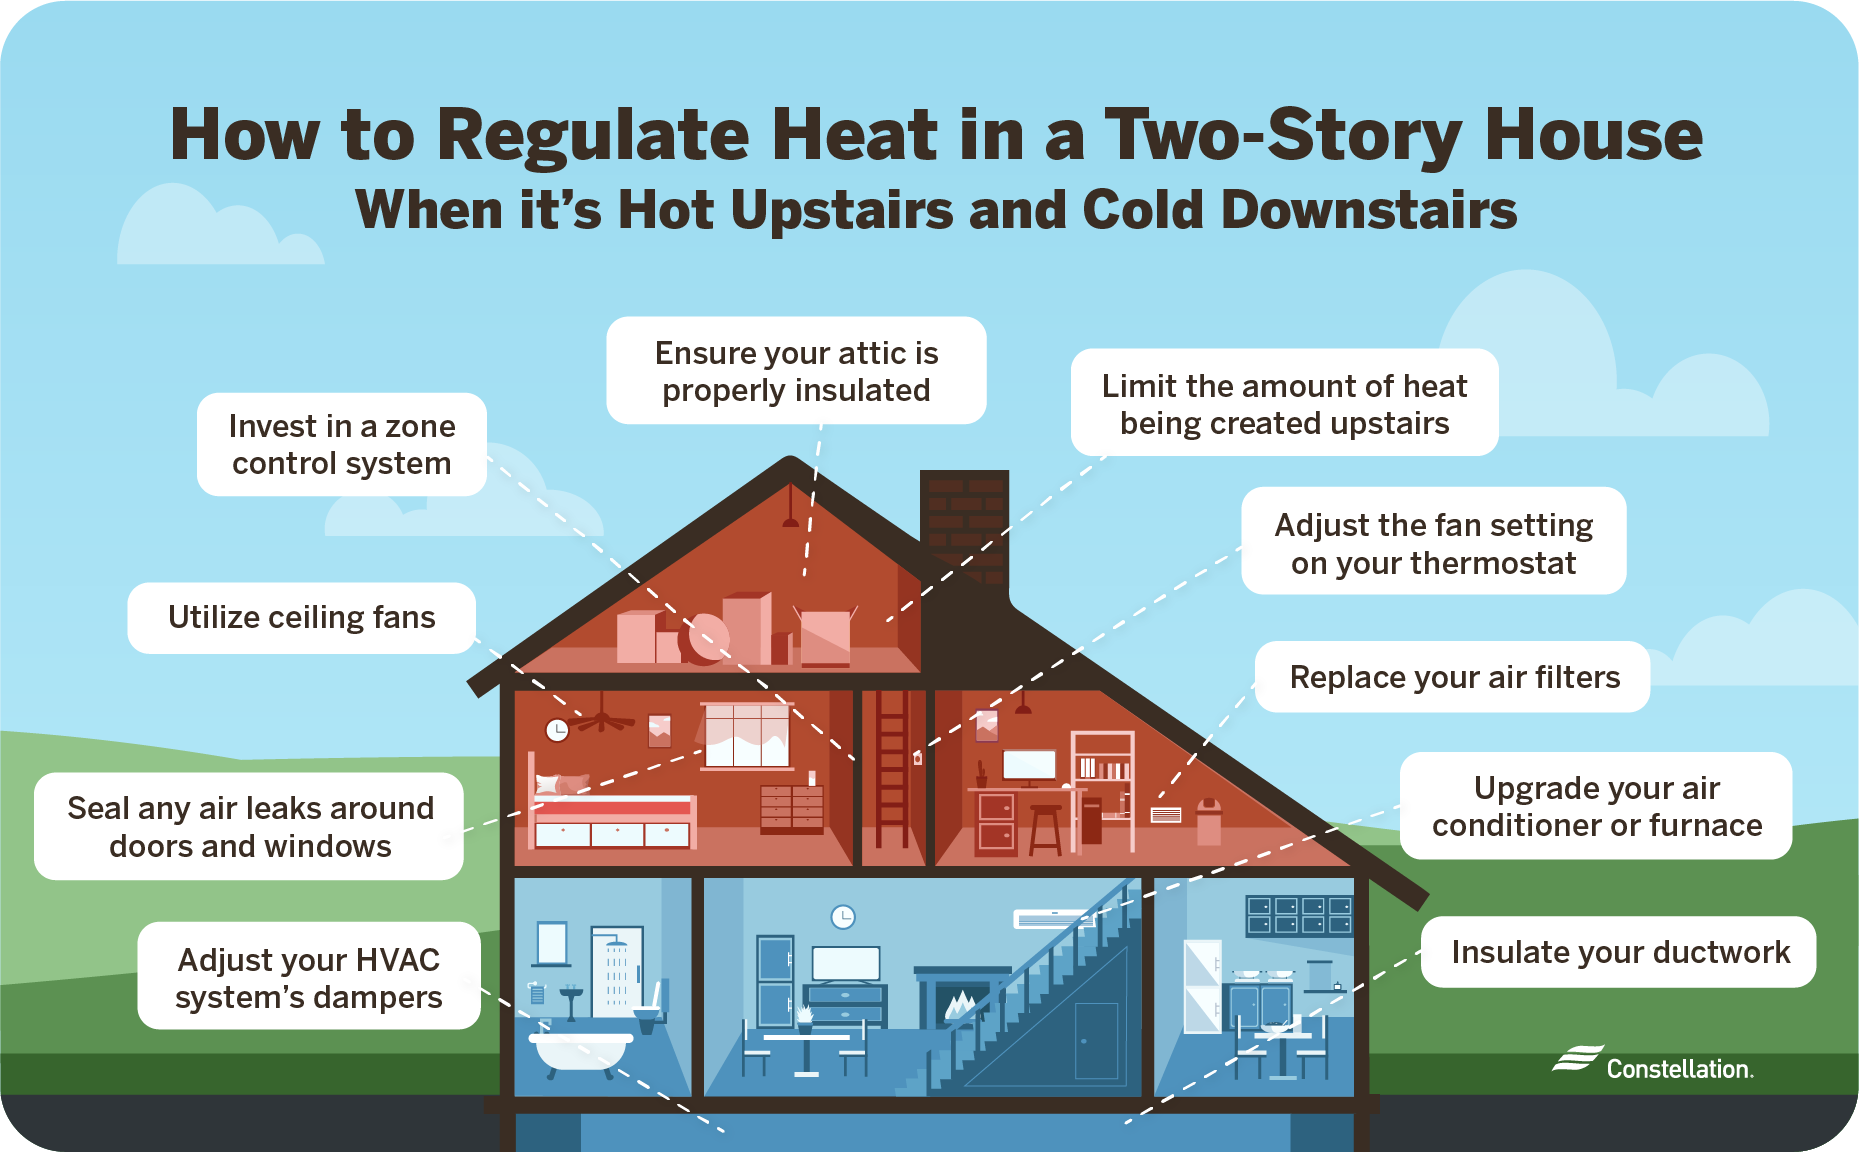 upstairs hotter than downstairs how to fix Why is it warm upstairs?